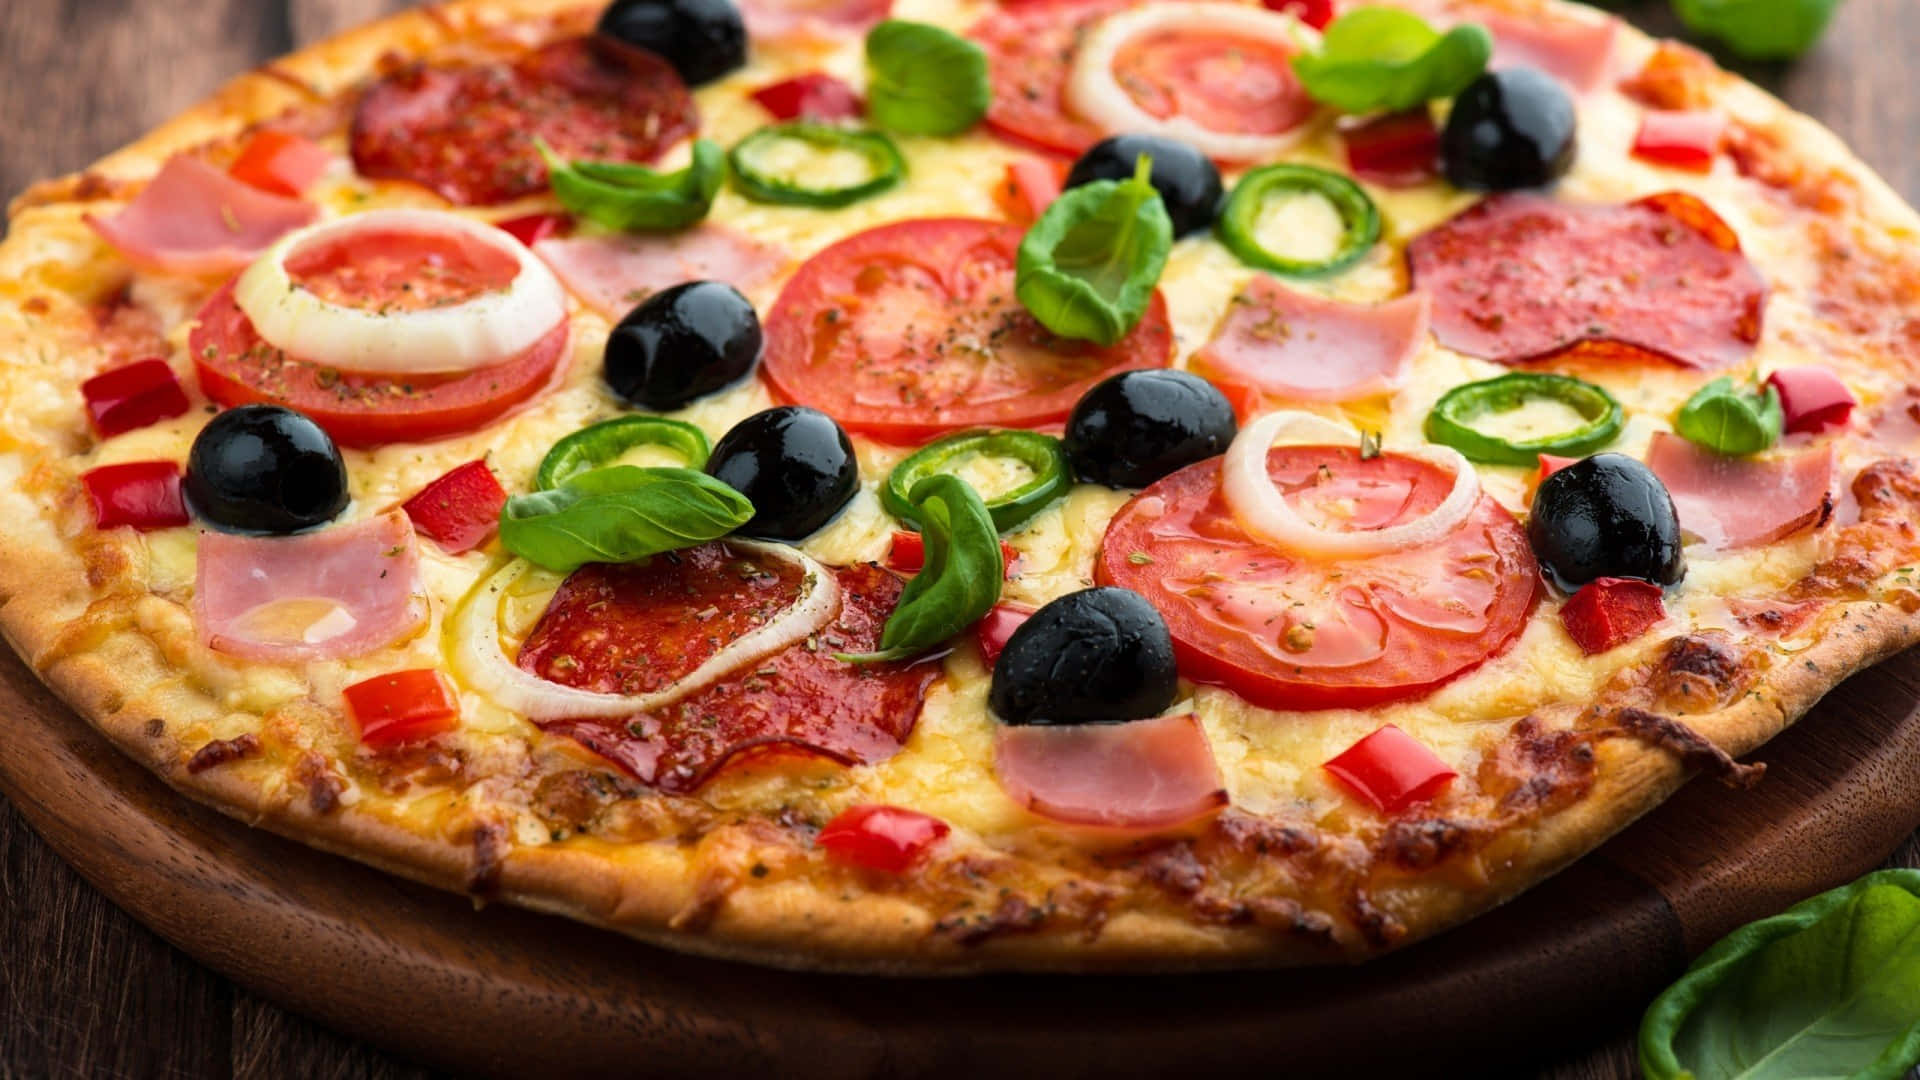 A Pizza With Olives, Tomatoes, And Olives On A Wooden Plate Wallpaper